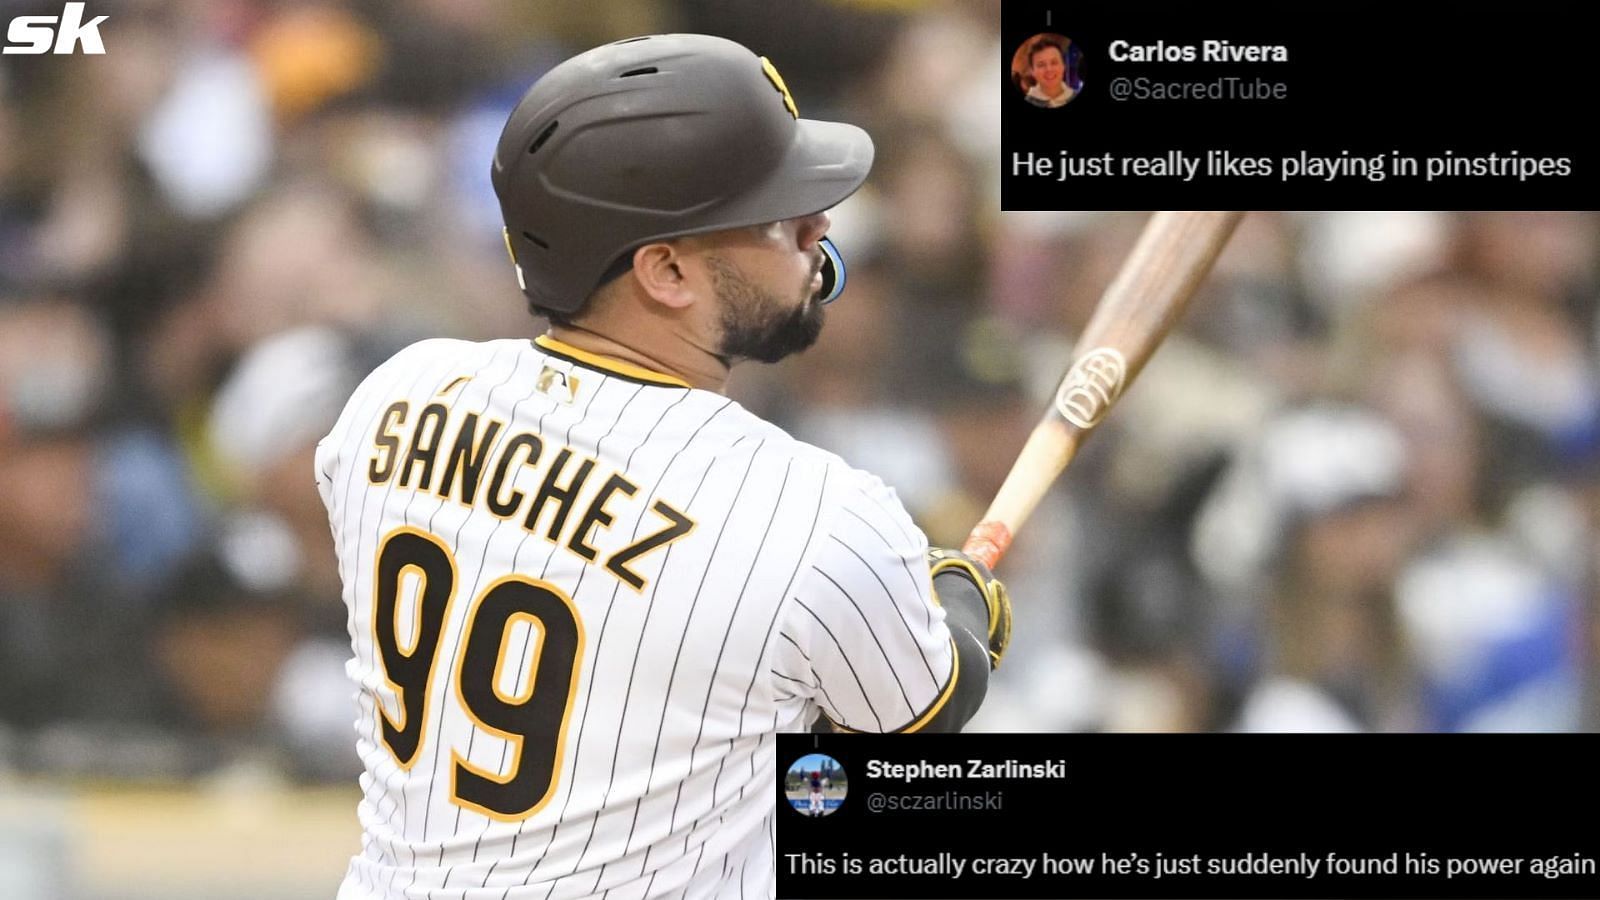 Gary Sanchez claimed off waivers by San Diego Padres